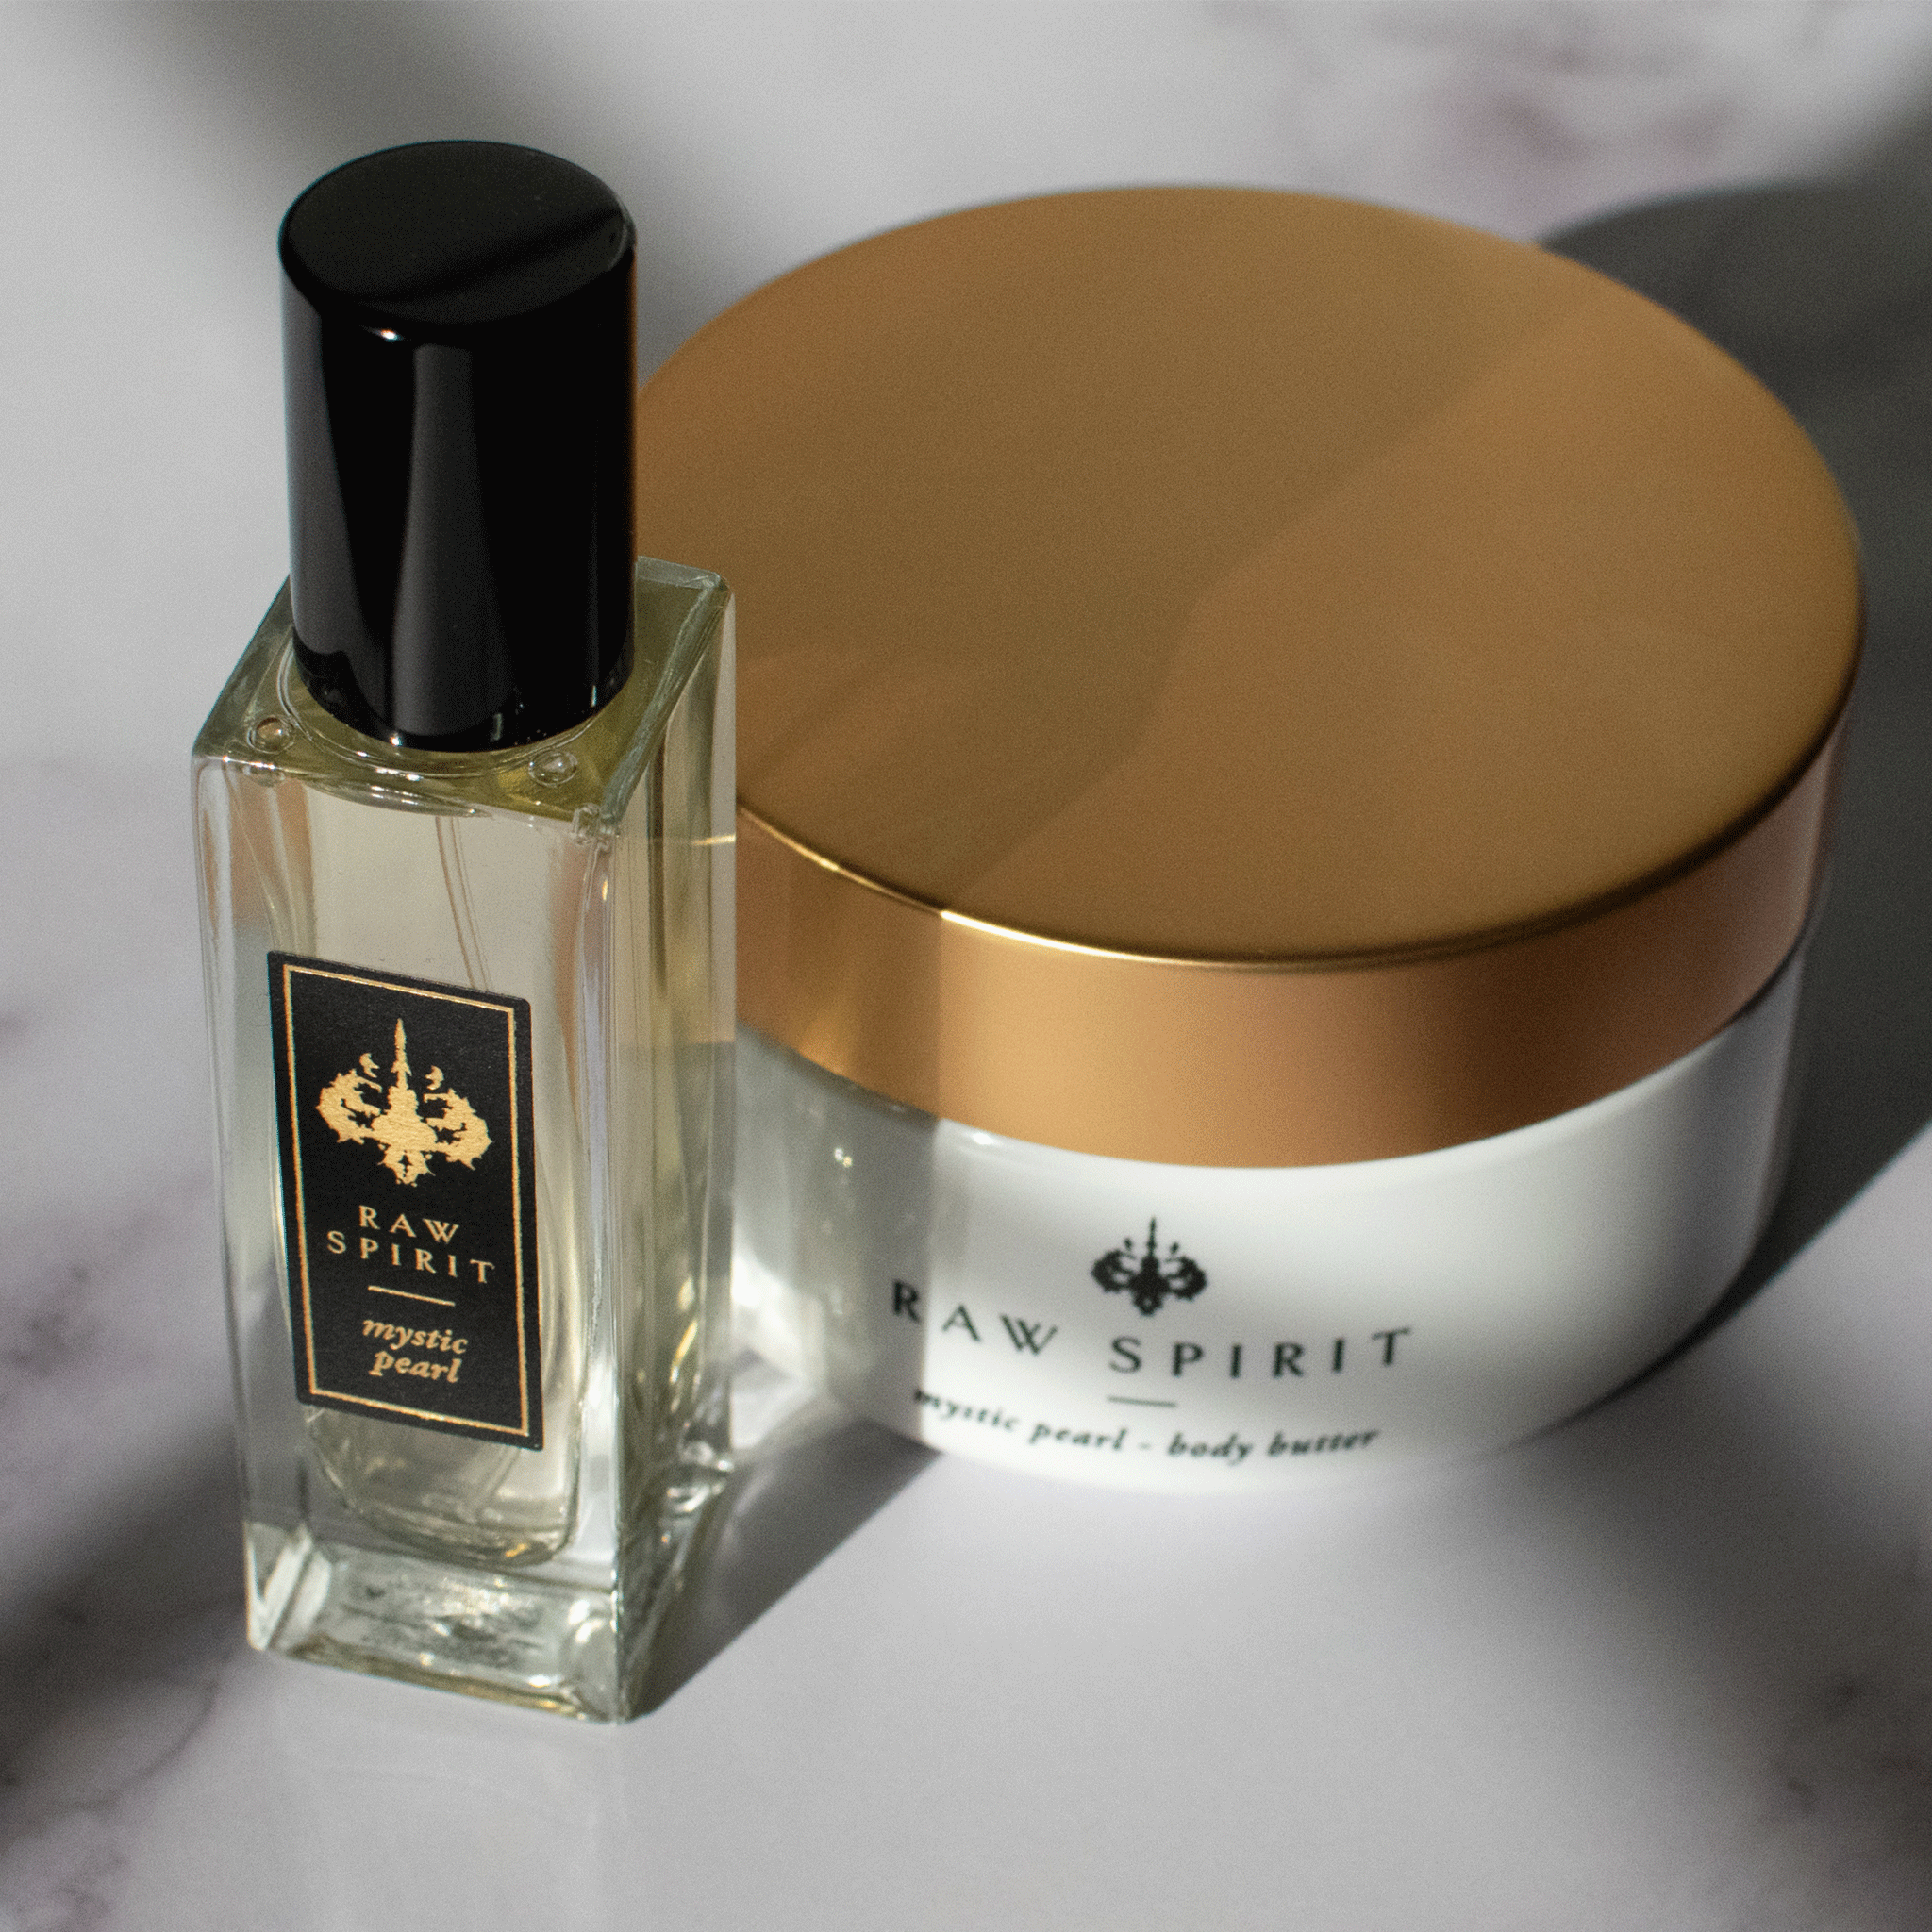 The Raw Spirit Fragrances Mystic Pearl gift set features the fresh and floral scent of Mystic Pearl in both a Perfume and Scented Body Butter format